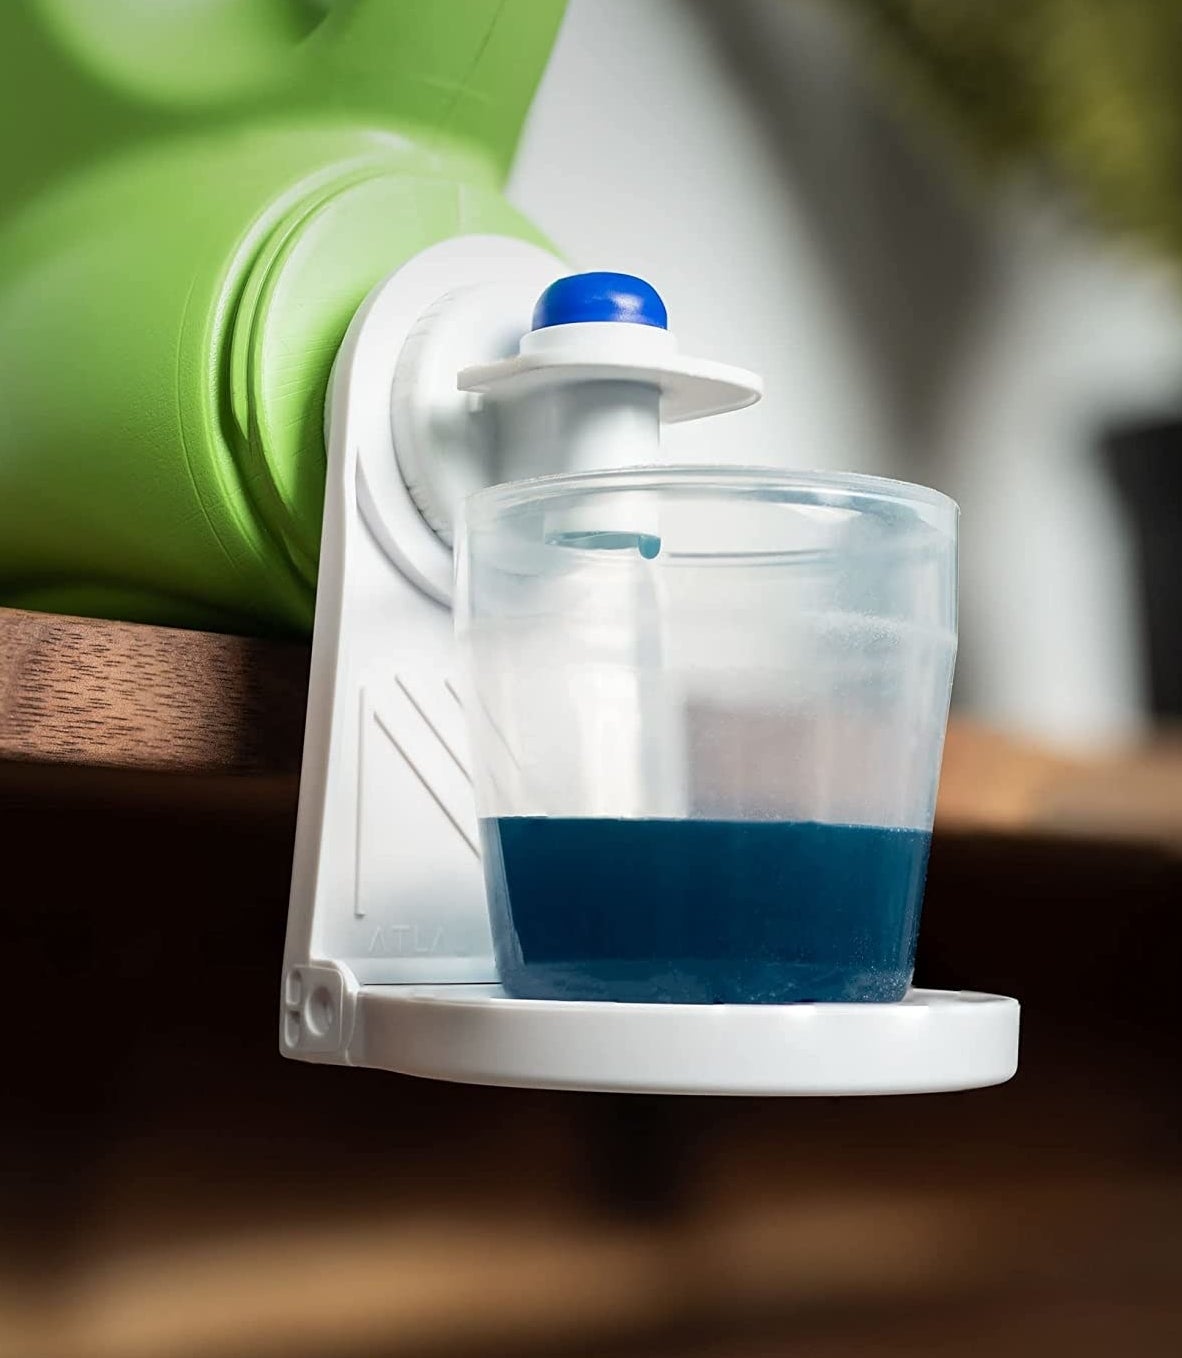 A cup of laundry detergent sitting on the little cup holder